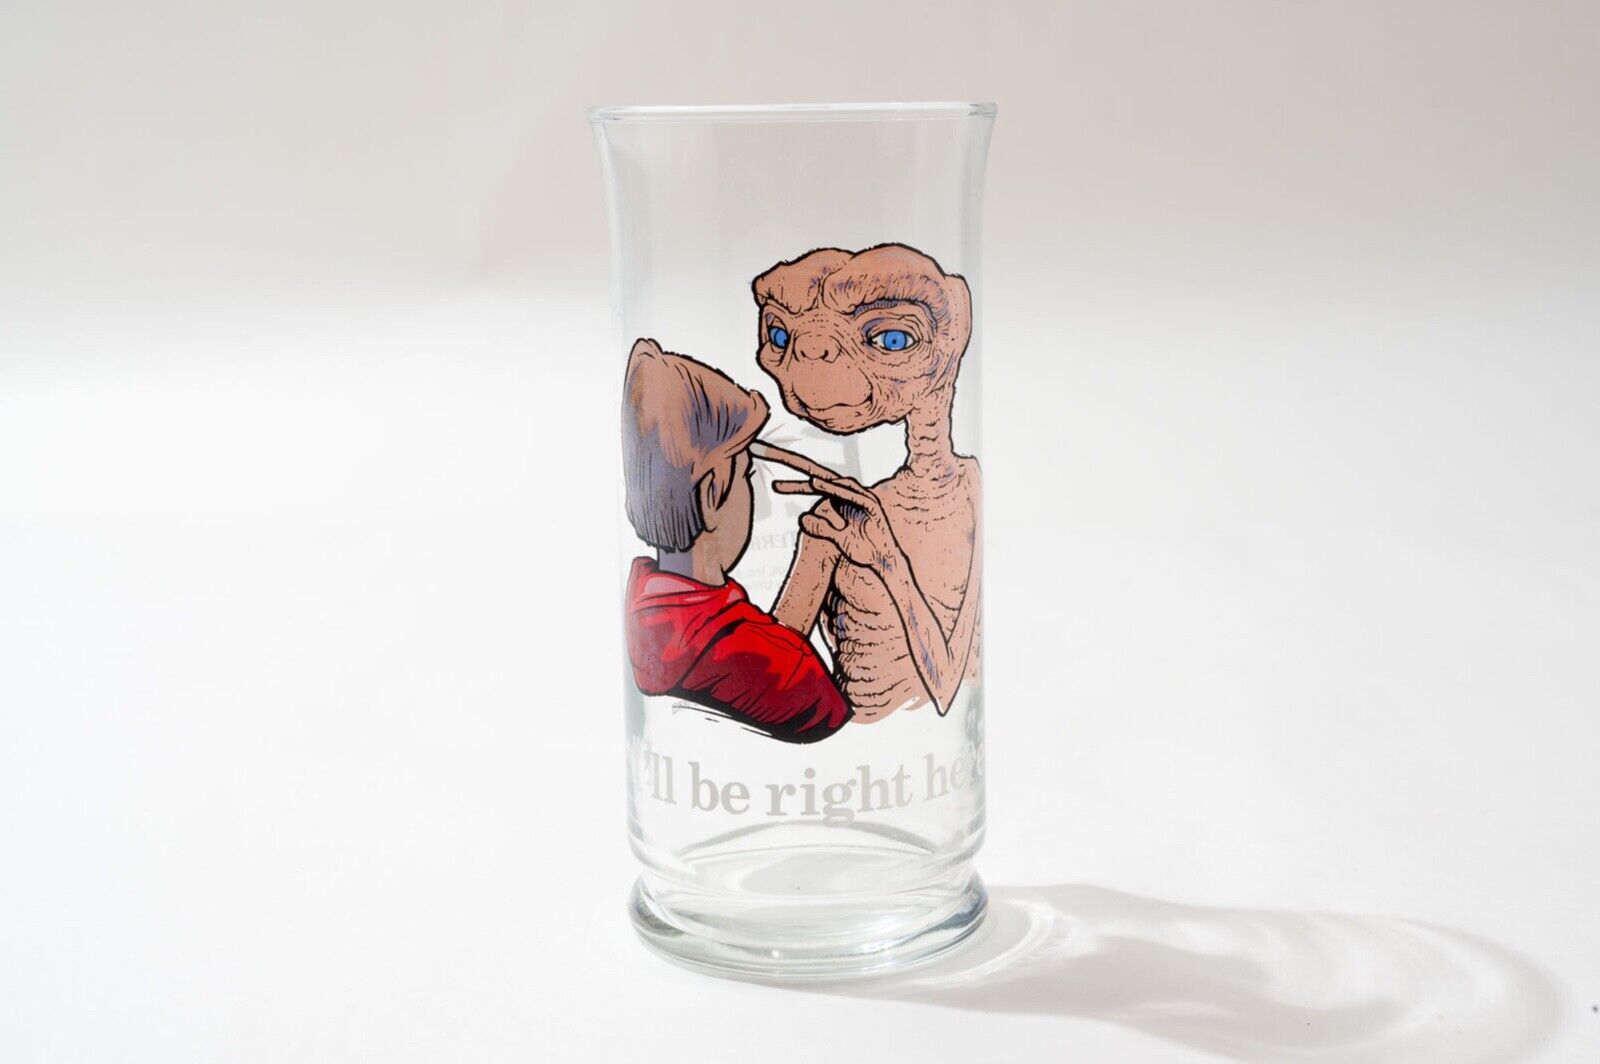 Vintage 1982 Pizza Hut E.T. Ill be right here Limited Edition Collector’s Glass